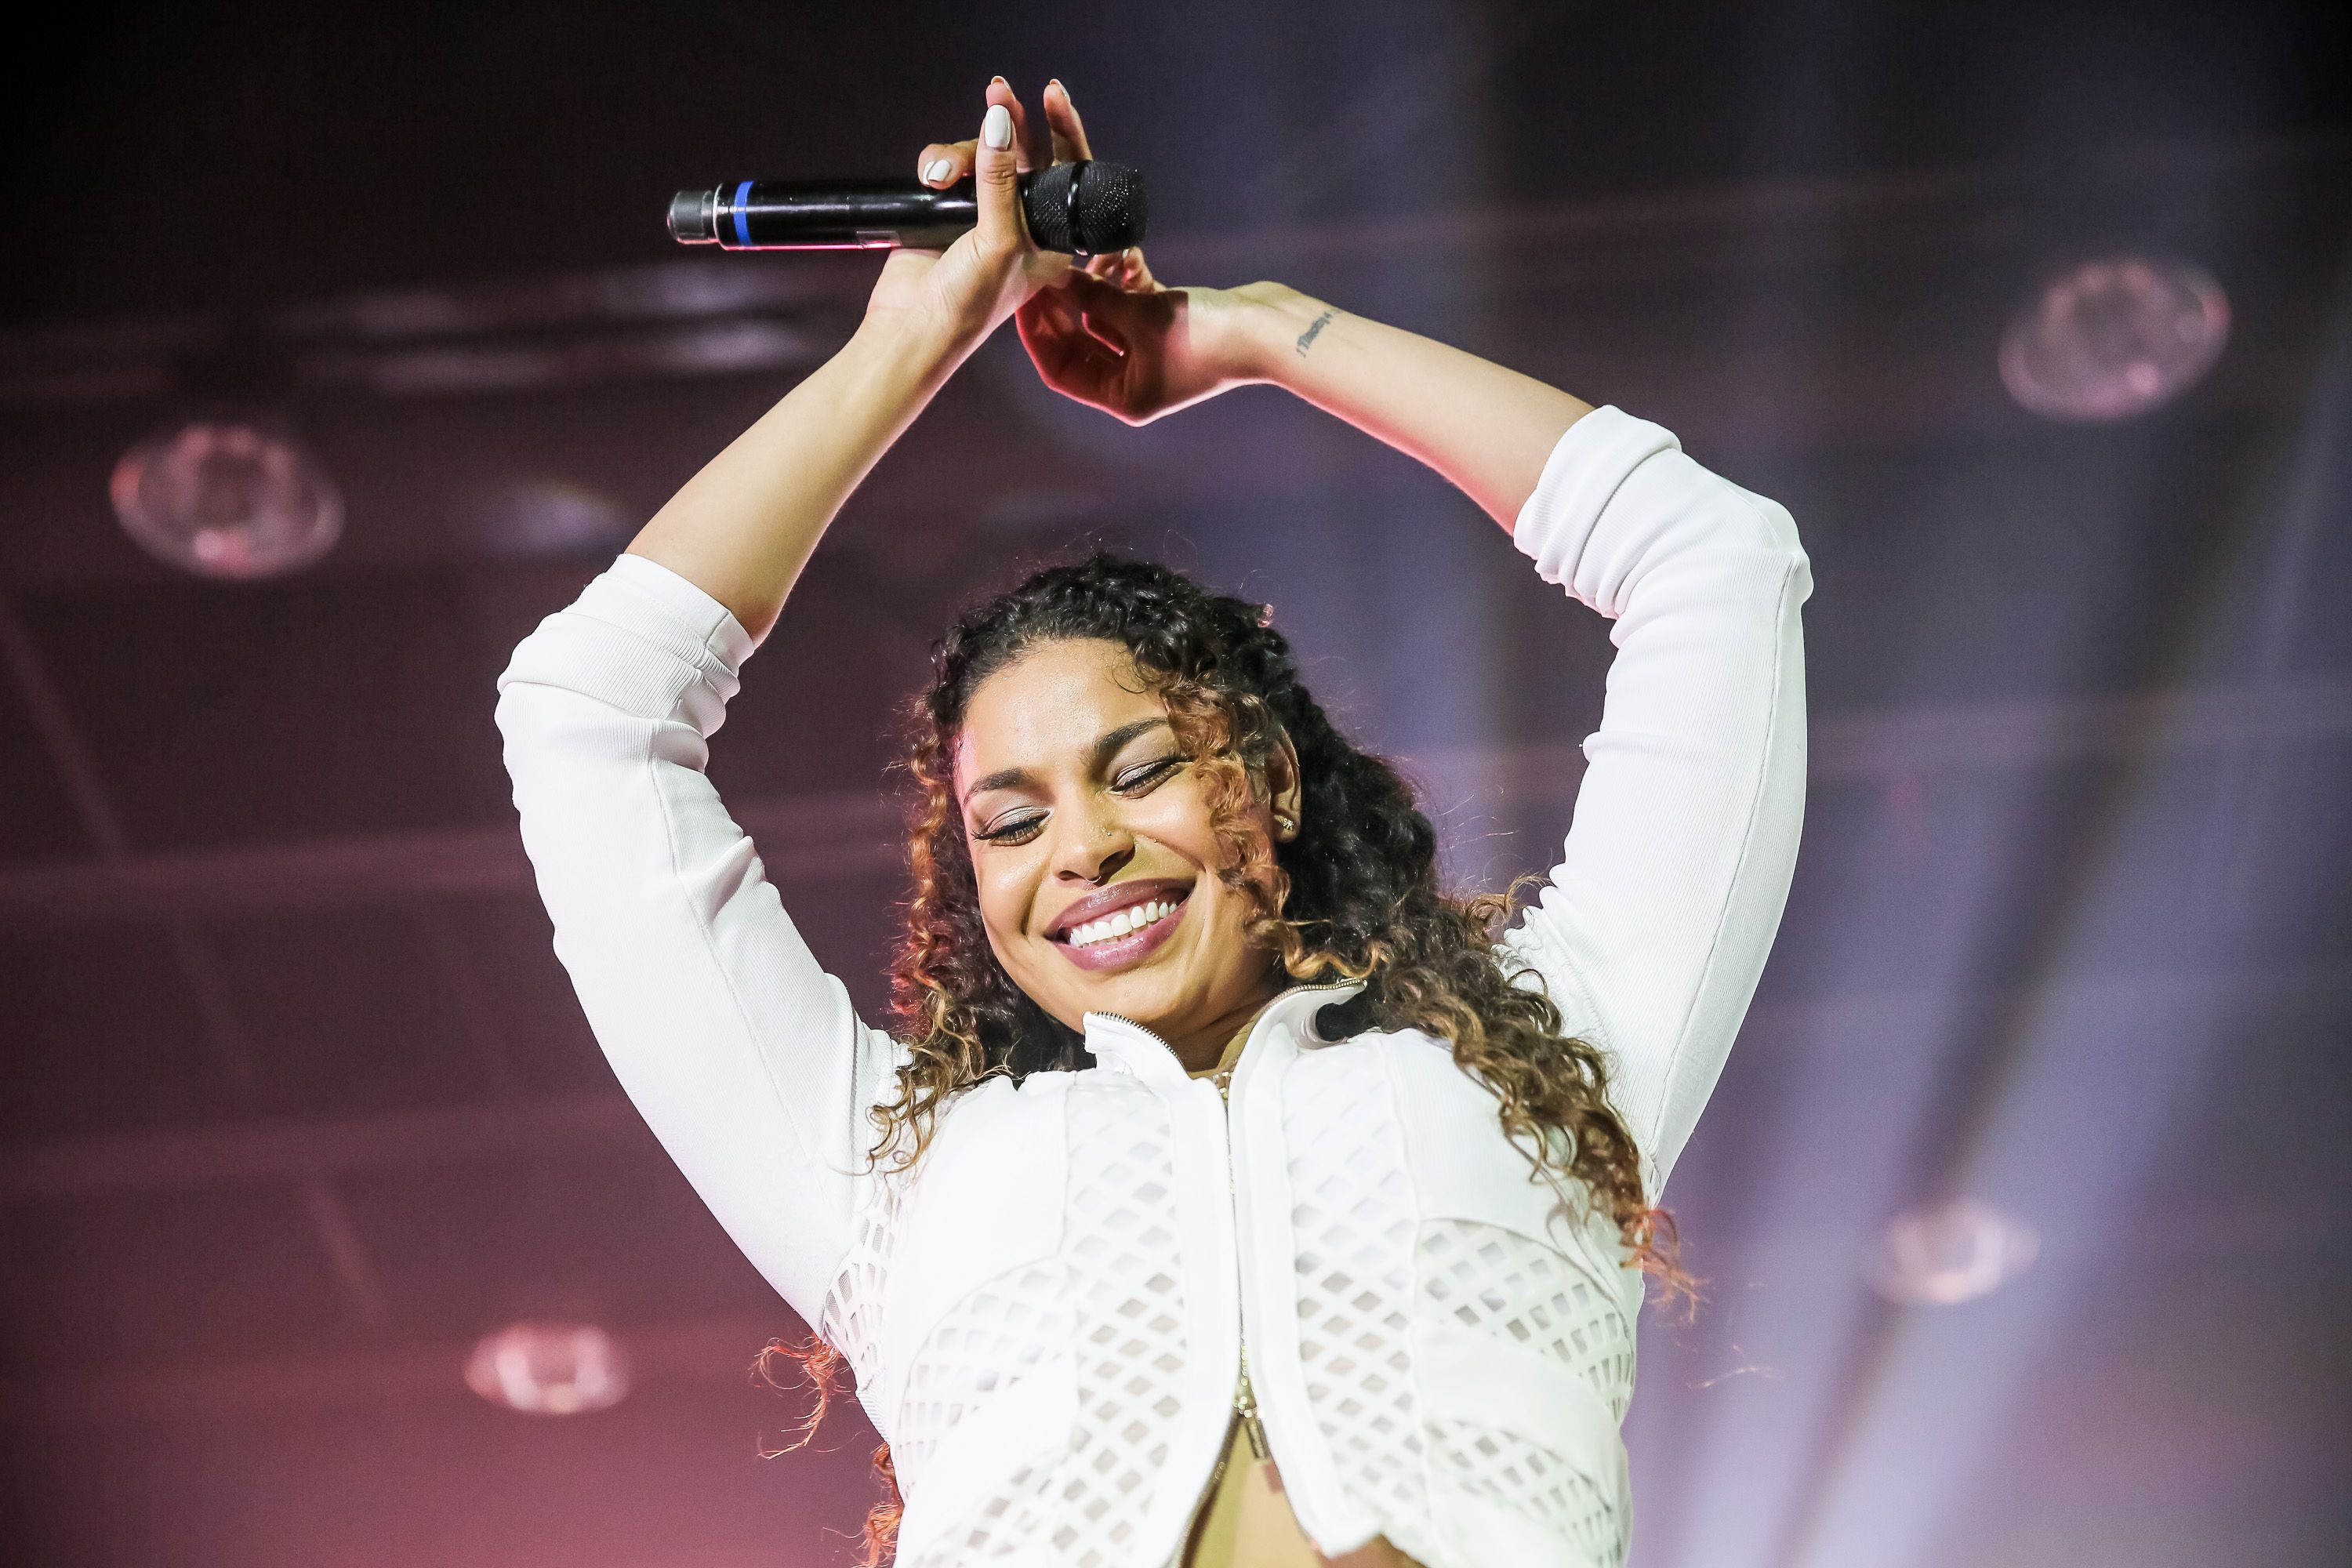 Jordin Sparks Has Some Great Stuff To Say About Body Confidence